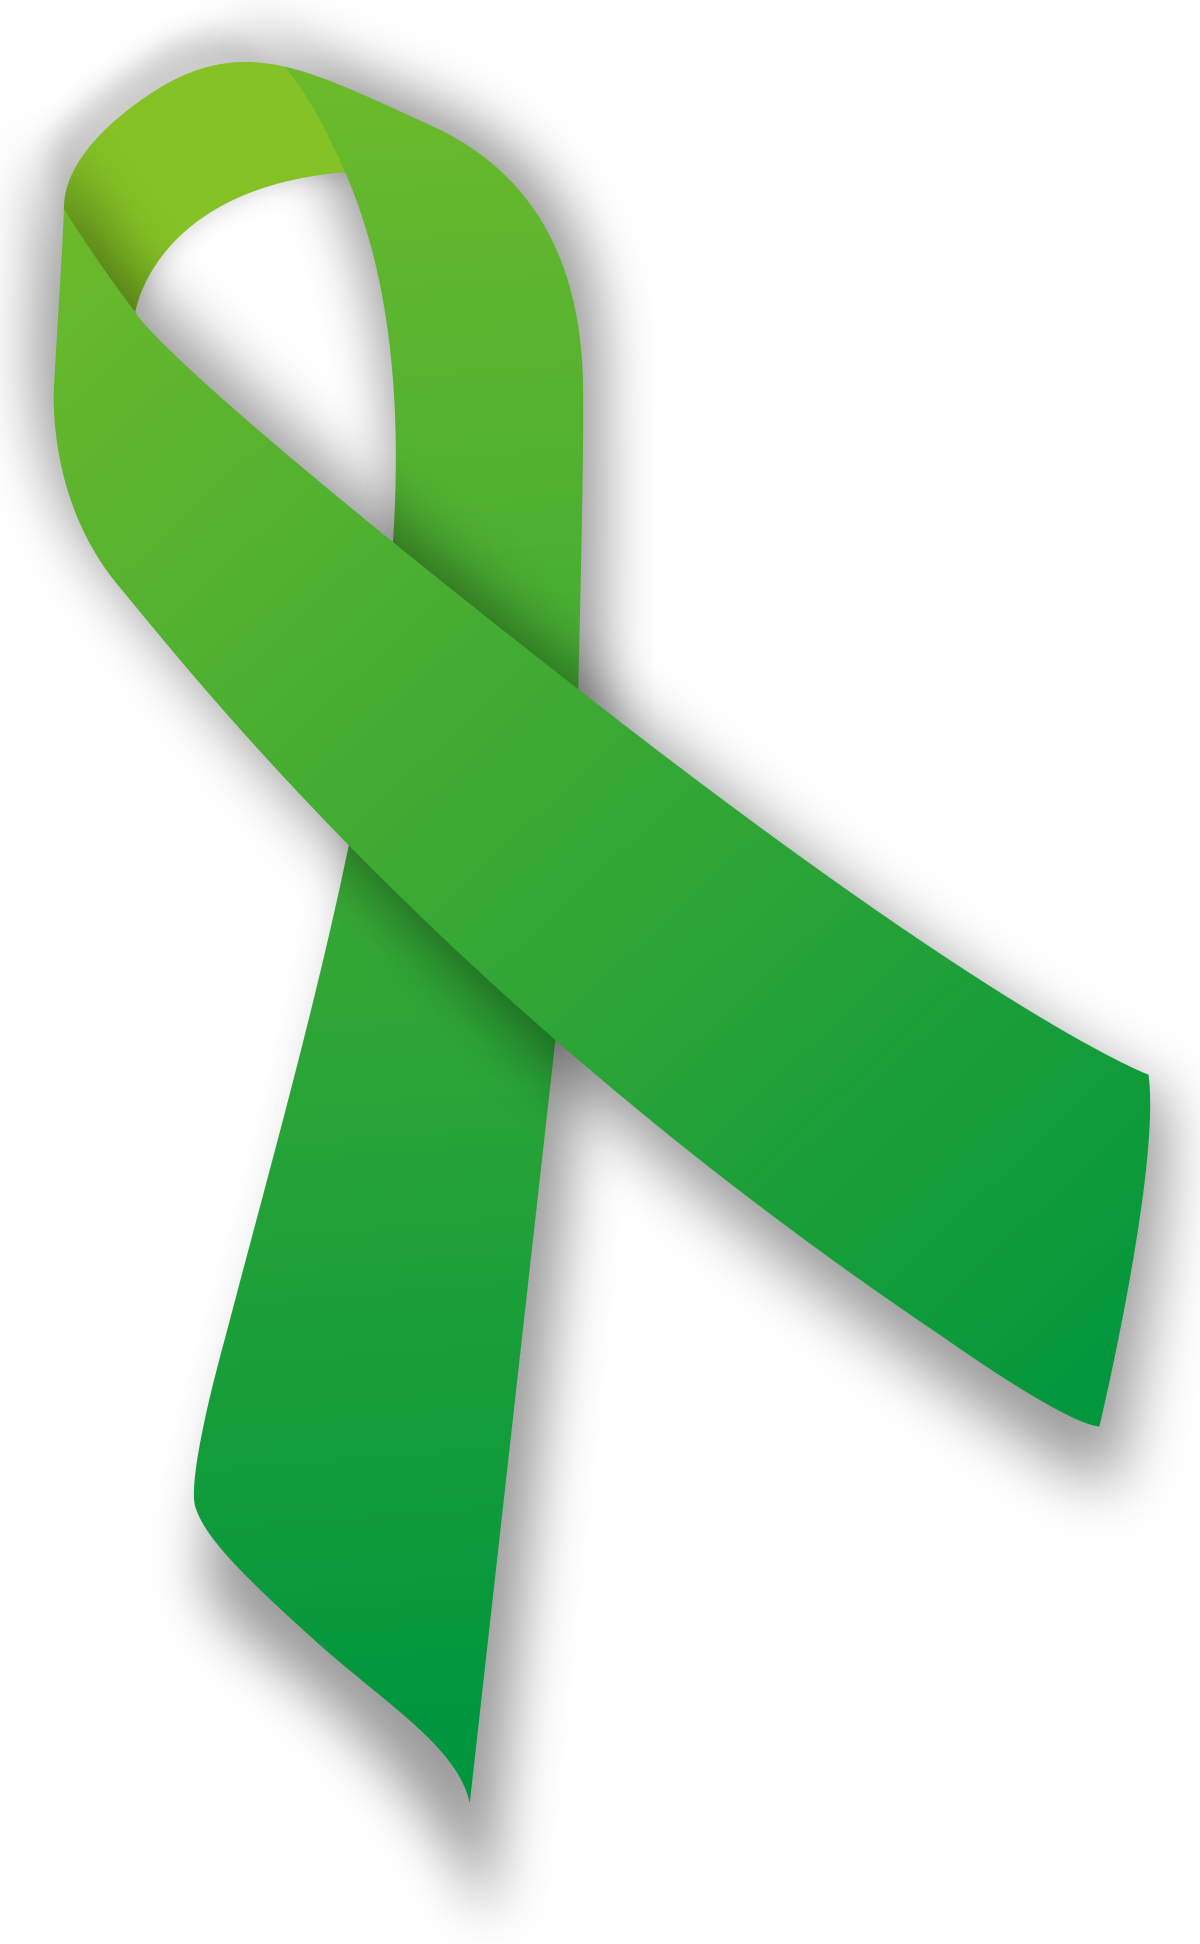 Green Ribbon PNG Image Background